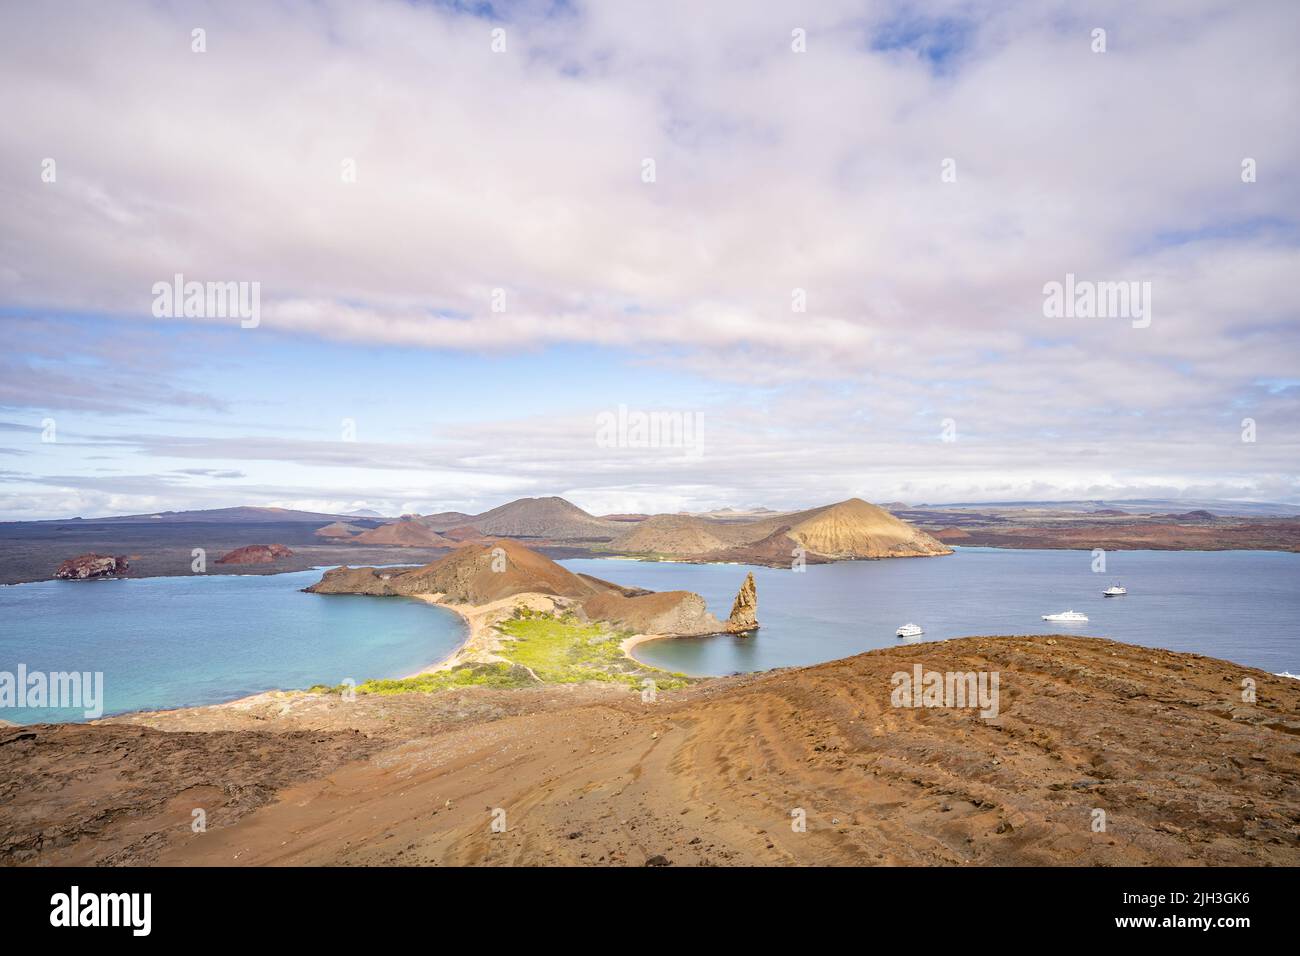 Scenic landscape of Galapagos archipelago with Pinnacle Rock on Bartolome Island view from summit trail Stock Photo